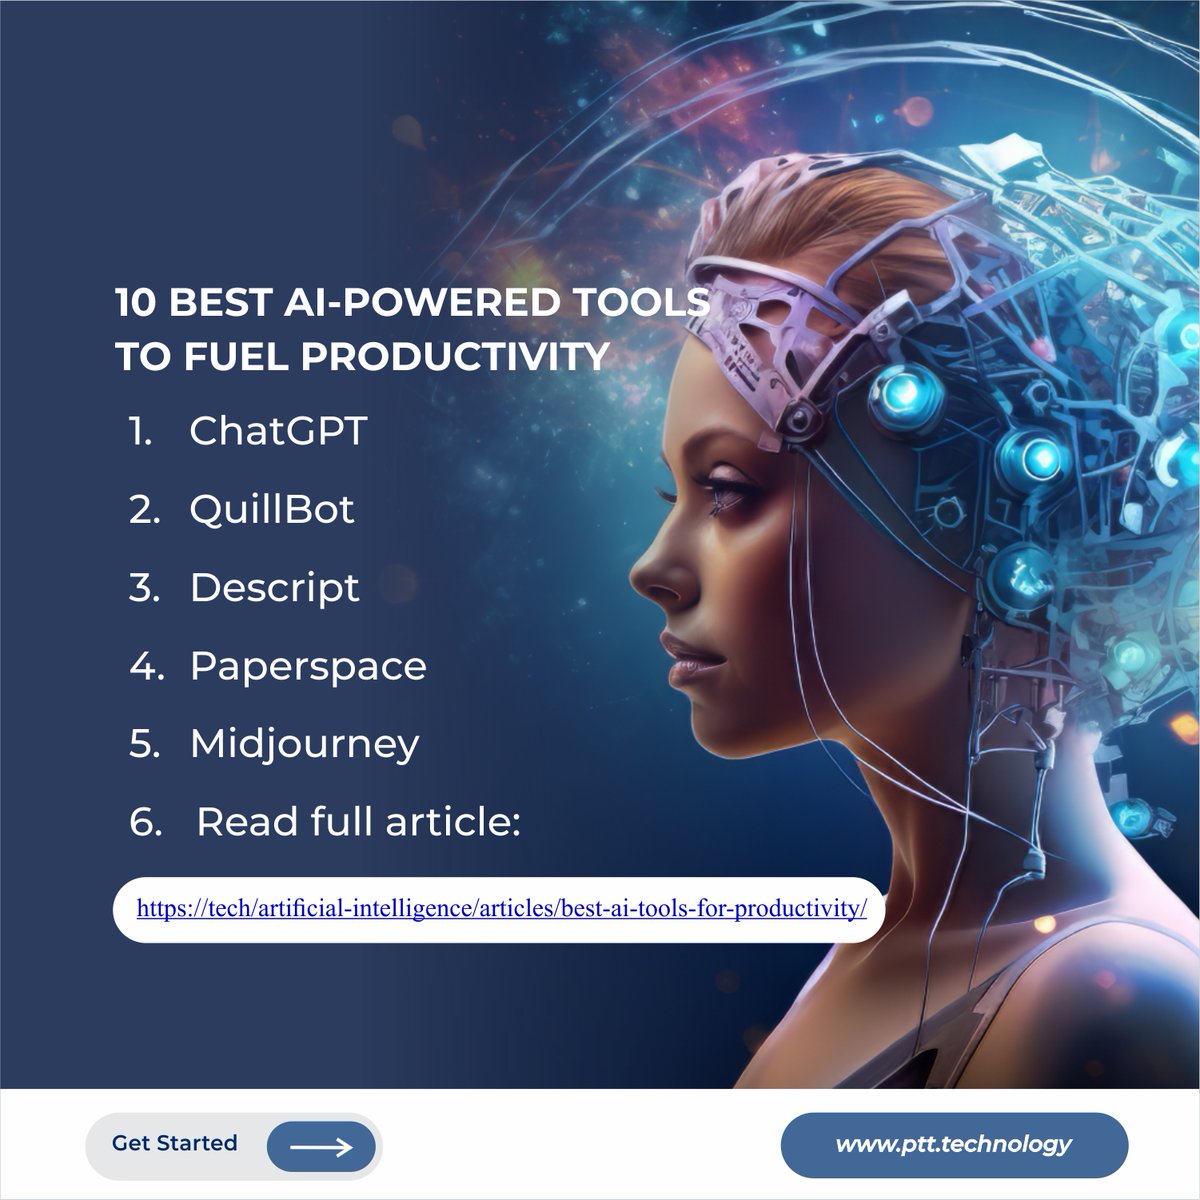 10 Best AI-Powered Tools To Fuel Productivity

Read here: spiceworks.com/tech/artificia…   

#PerfectTimingHolding #PerfectTimingTechnologies #AI #Automation #MachineLearning #ProductivityHacks #TechTools #BusinessTech #WorkflowOptimization #TimeManagement #SmartTechnology #Innovation